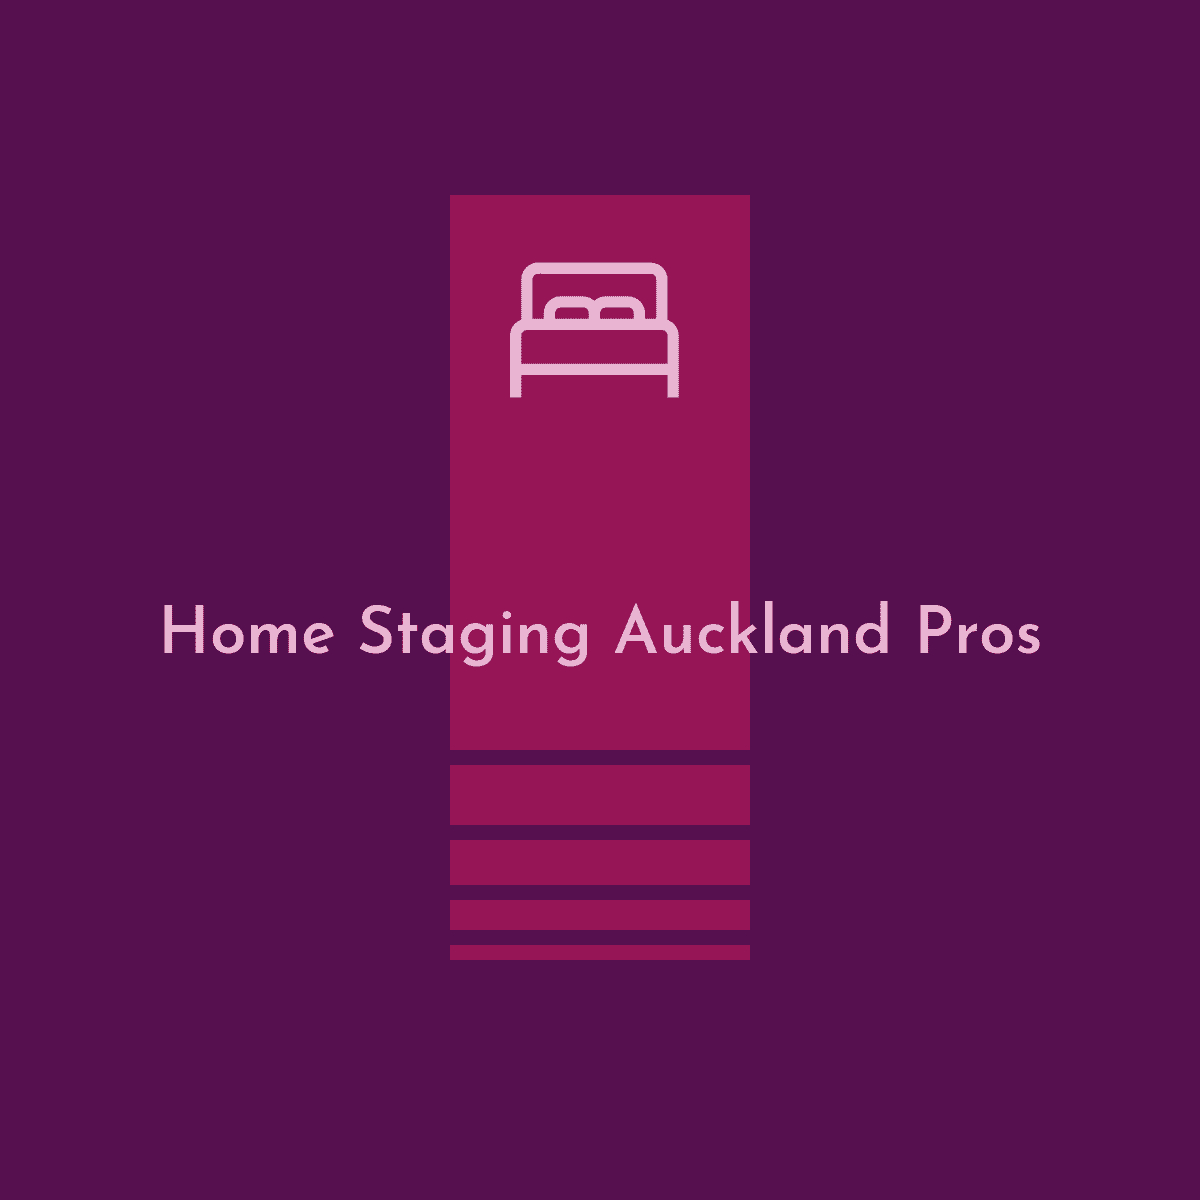 Home Staging Auckland Pros